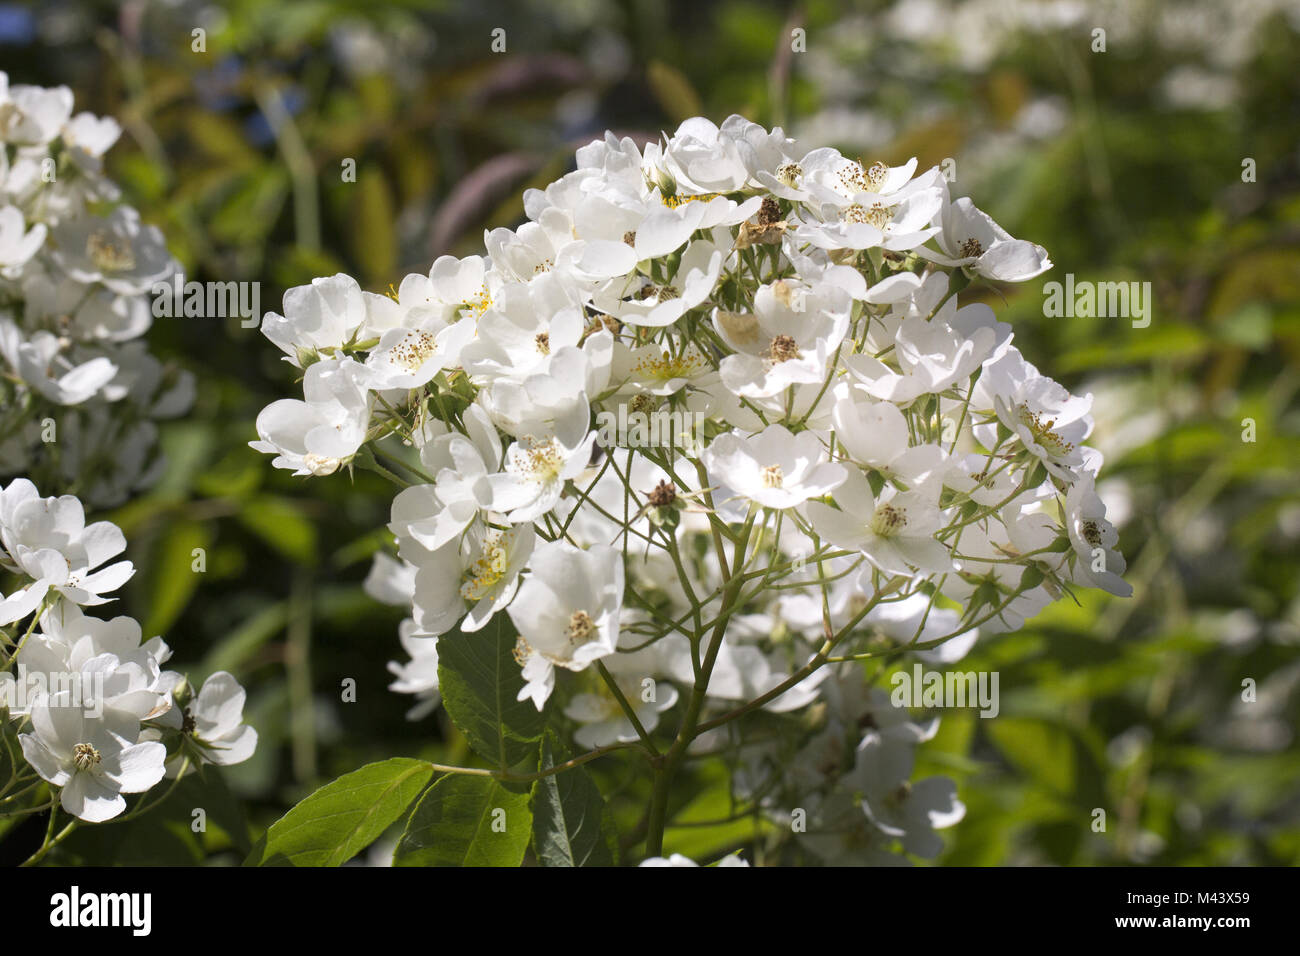 Himalaya Moschus Rose High Resolution Stock Photography and Images - Alamy